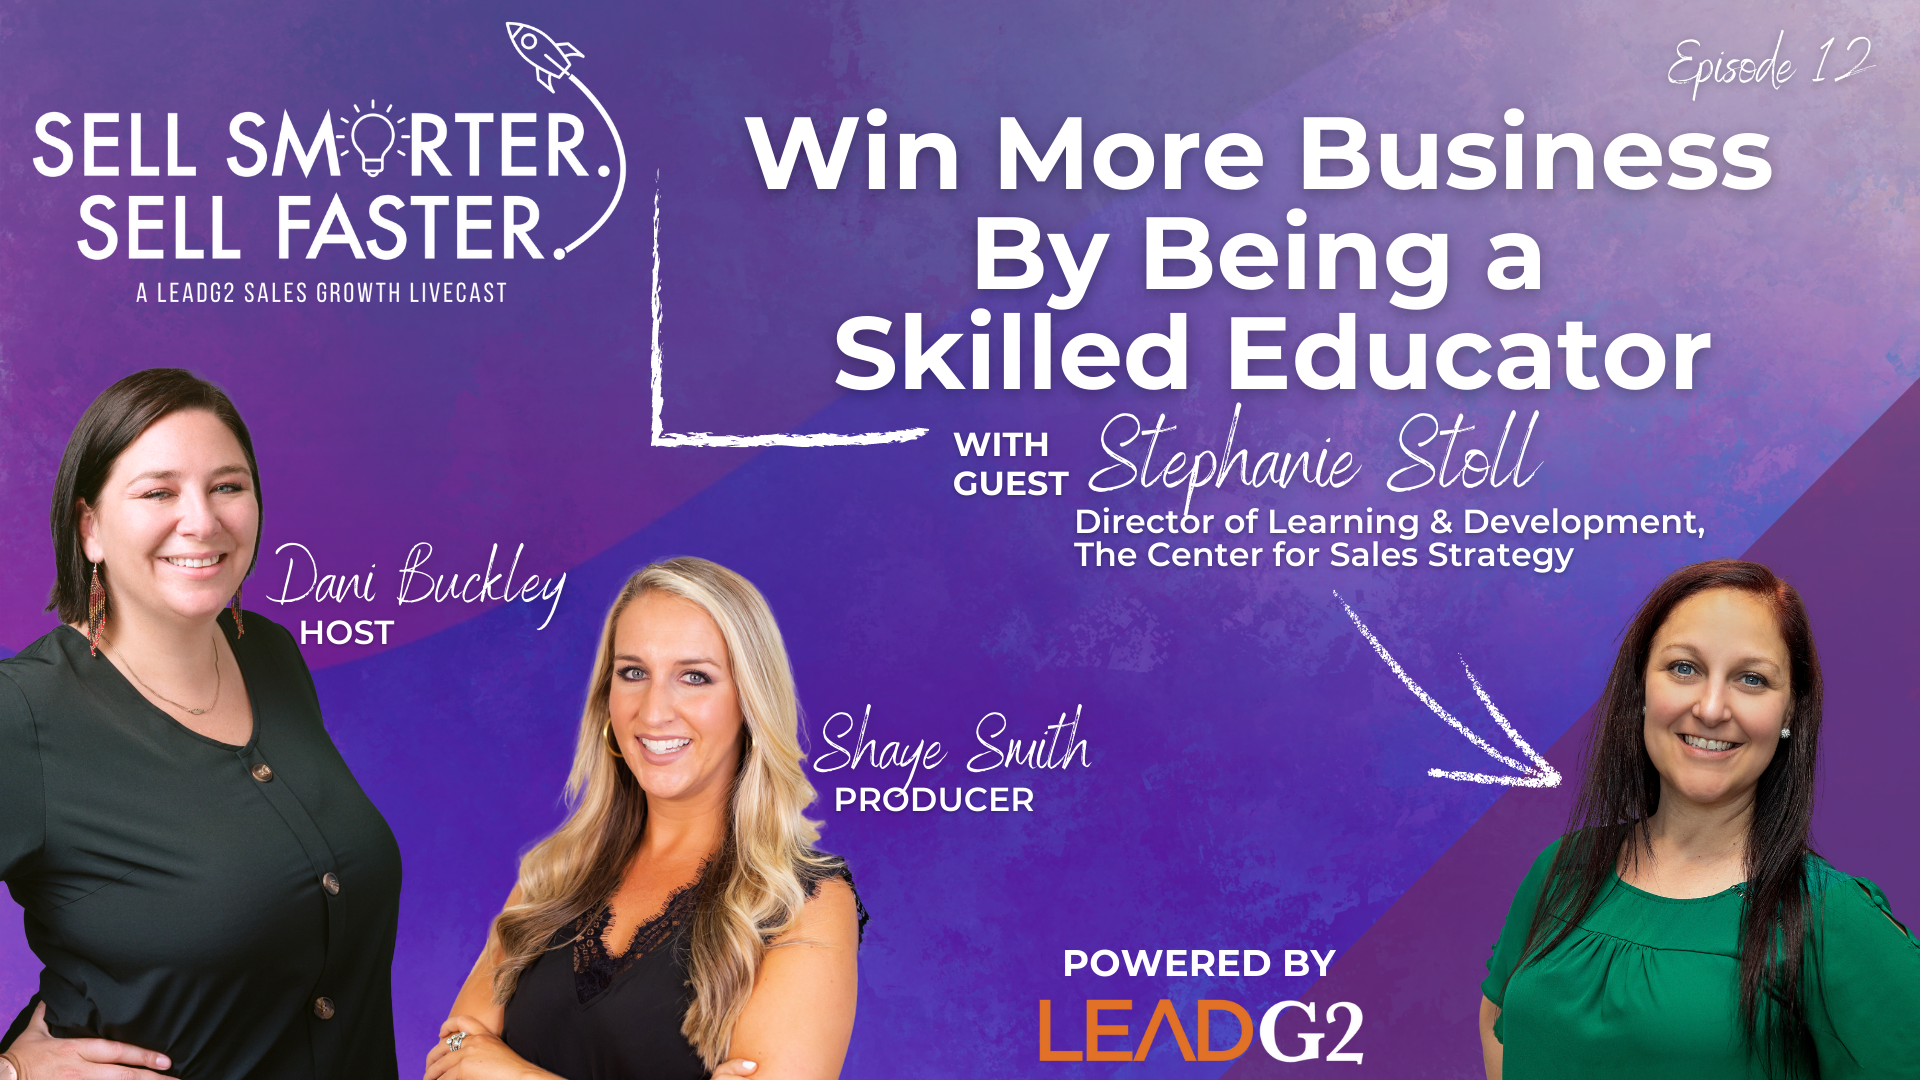 Win More Business By Being a Skilled Educator | Sell Smarter. Sell Faster.